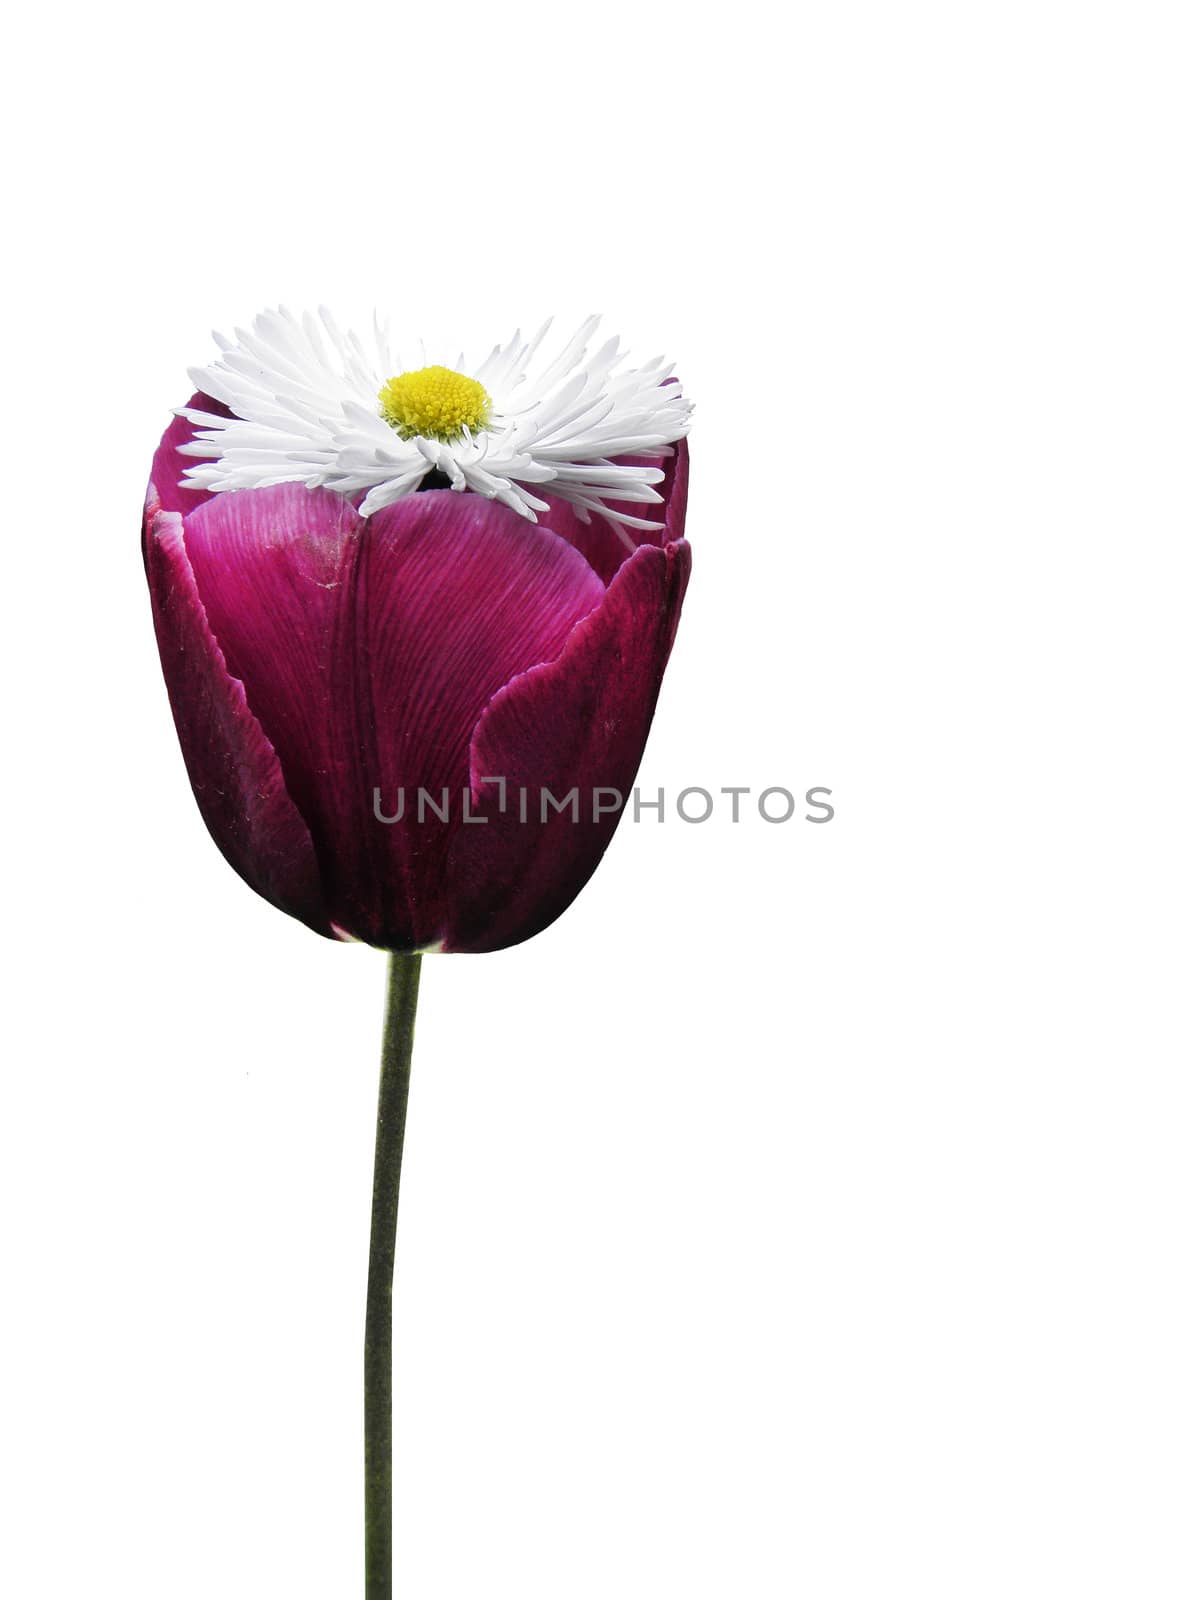 Purple tulip flower. The flower is another flower. Daisy all colors. On a white background.